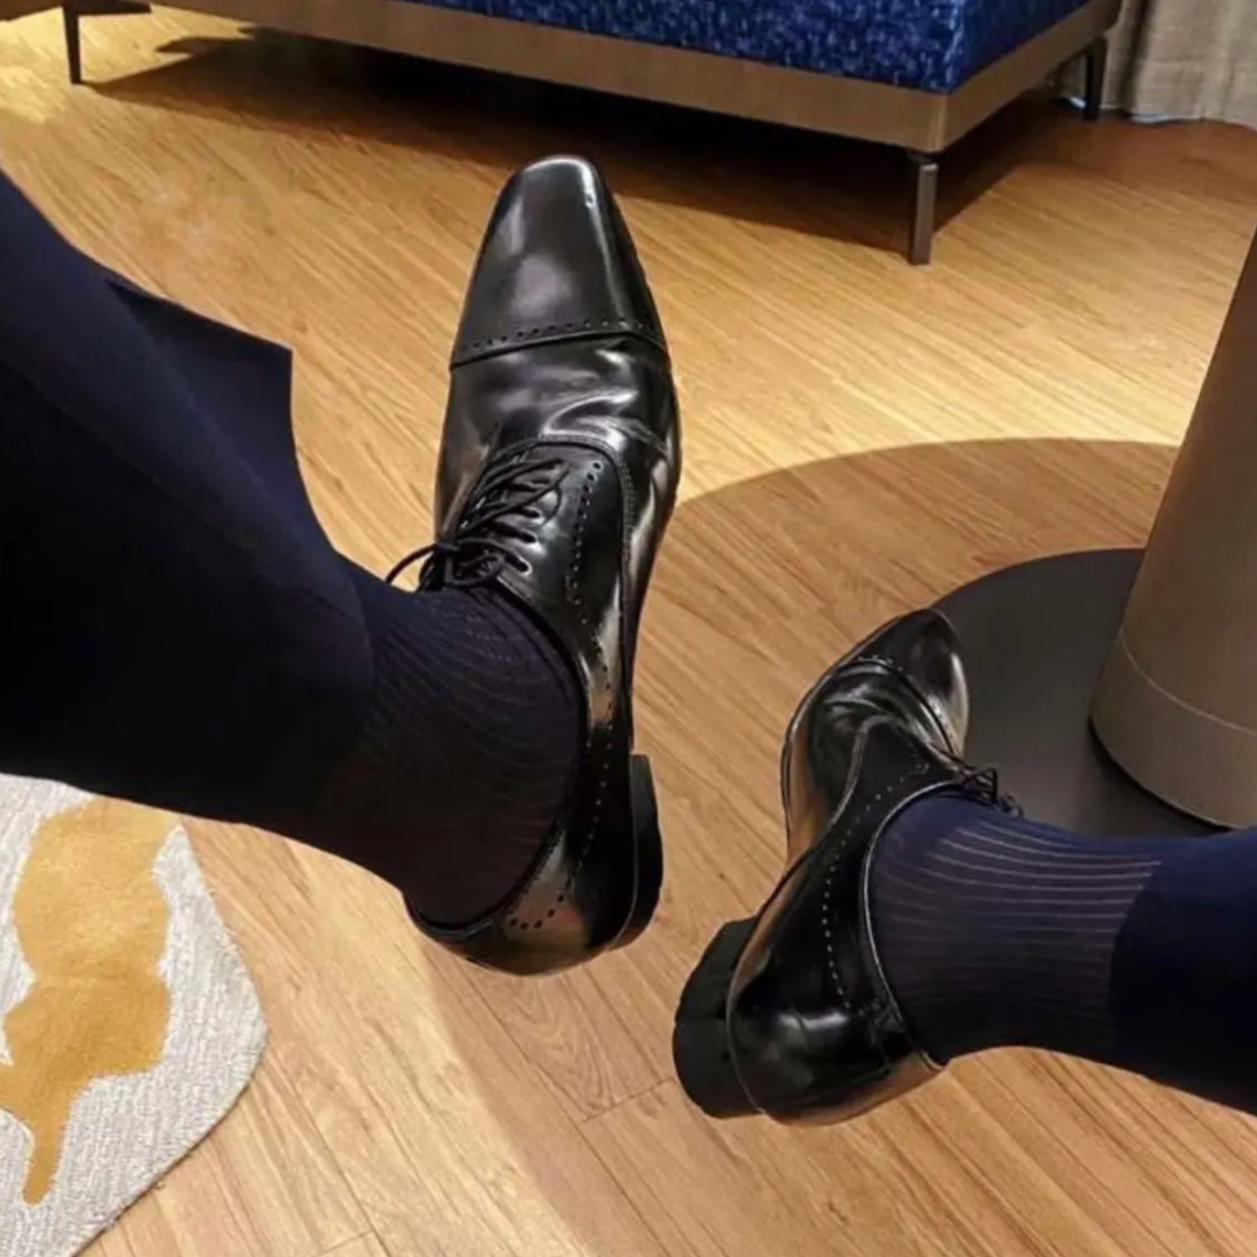 hot suit daddy in navy blue Ribbed Sheer OTC Socks: Men's Sheer Dress Socks for the Sexy Gay Man- pridevoyageshop.com - gay men’s harness, lingerie and fetish wear